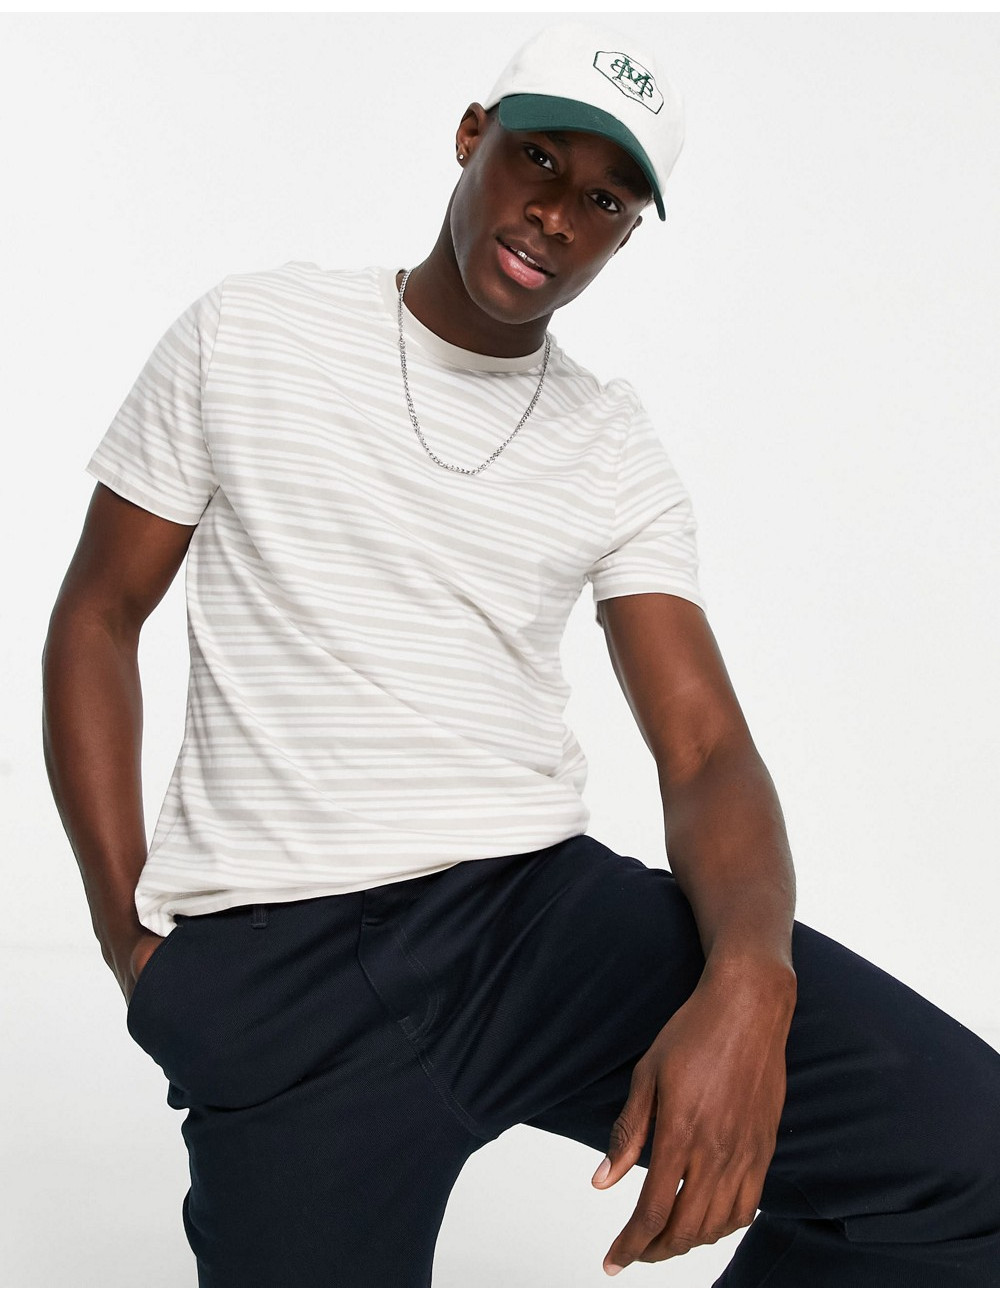 New Look striped t-shirt in...